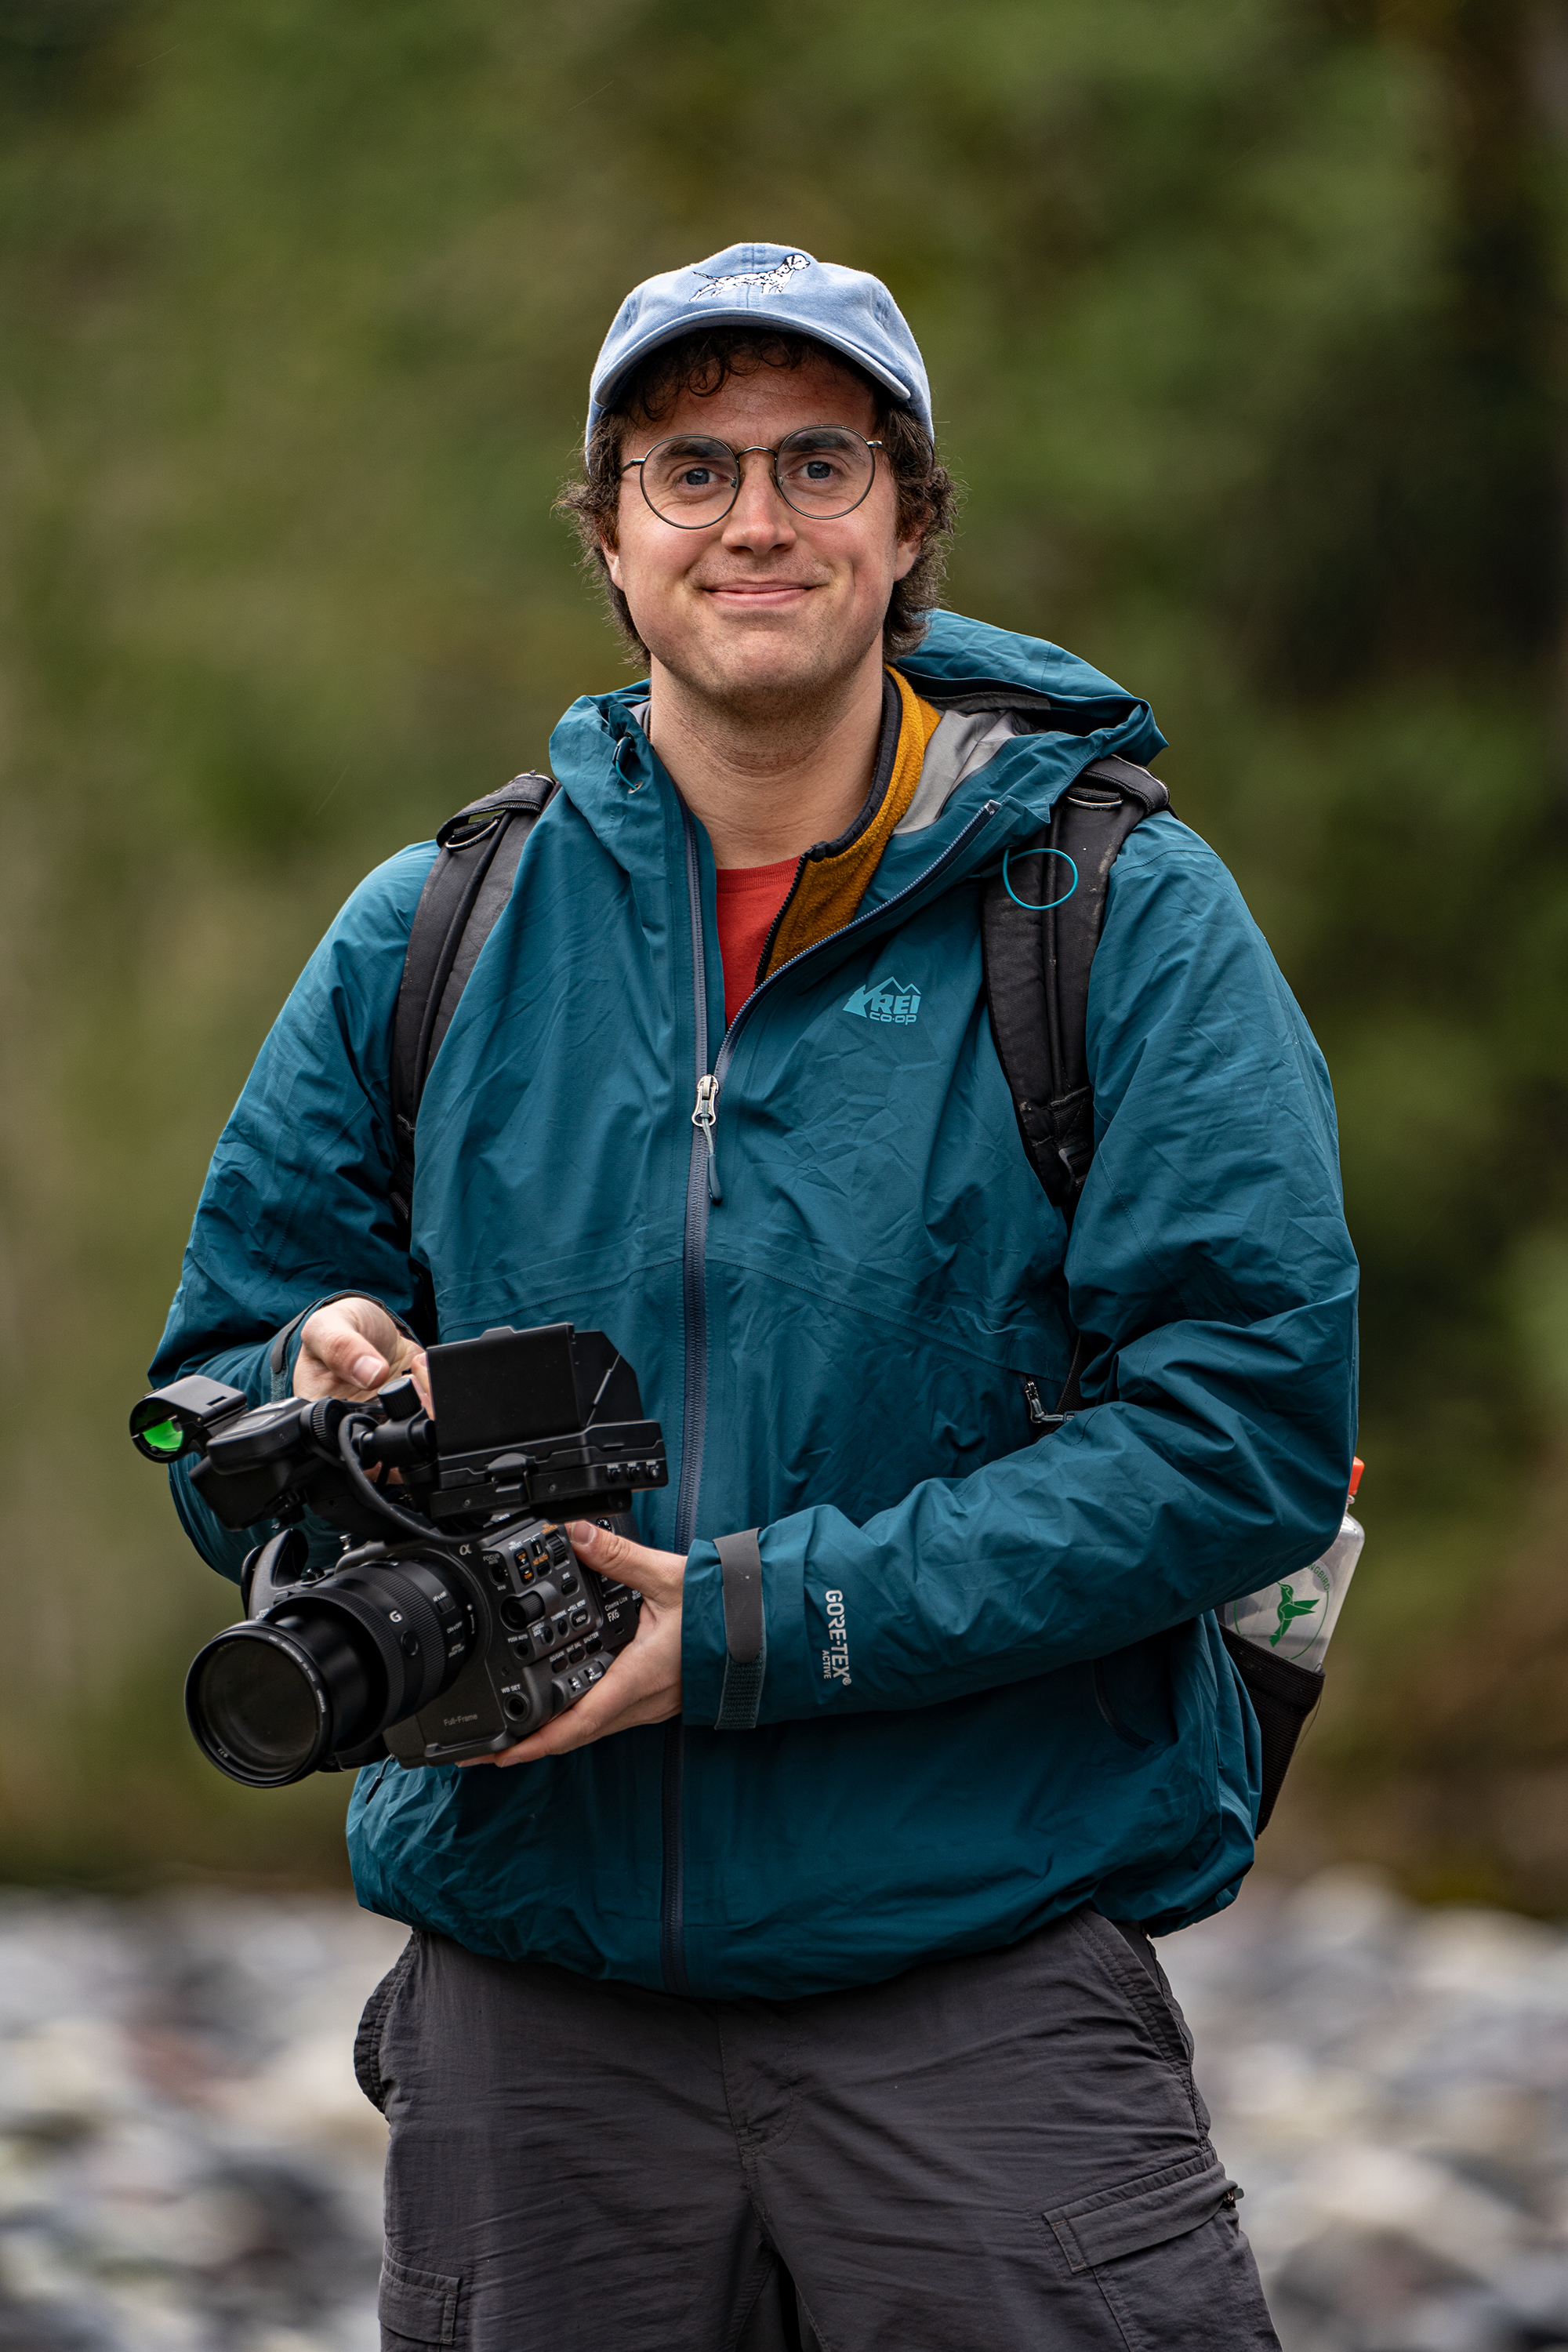 Luke, wearing a cap, jacket and hiking pants, stands near a rocky, forested shoreline wielding a high tech video recorder.